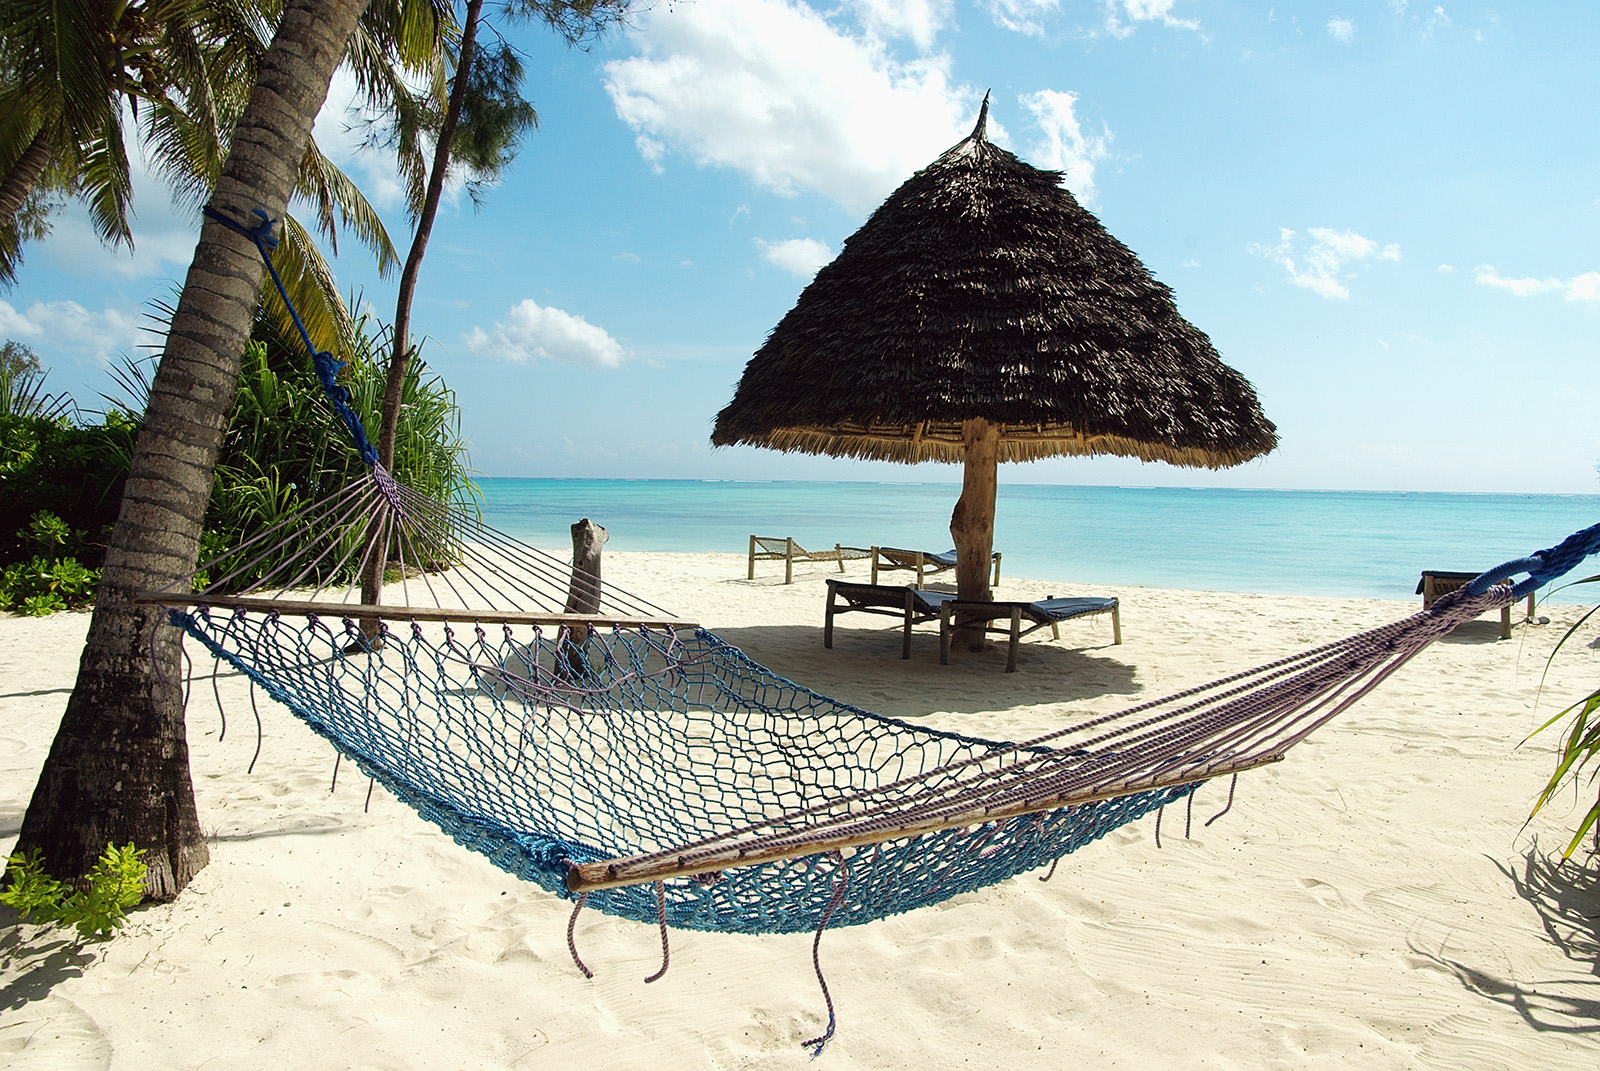 Exotic Zanzibar beach holidays are just one option for a trip extension.